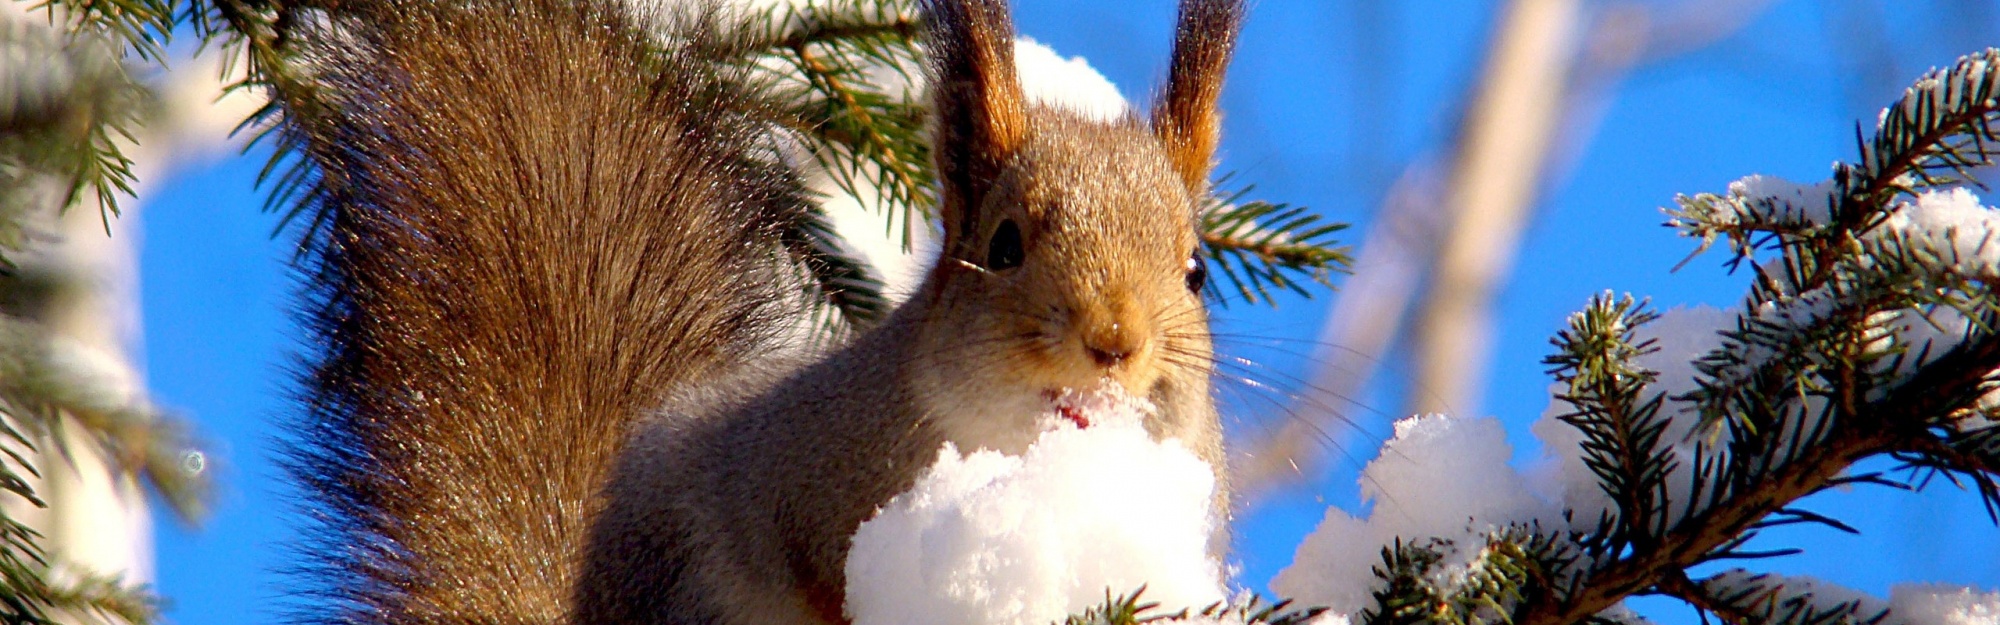 Squirrel On Branches Snow